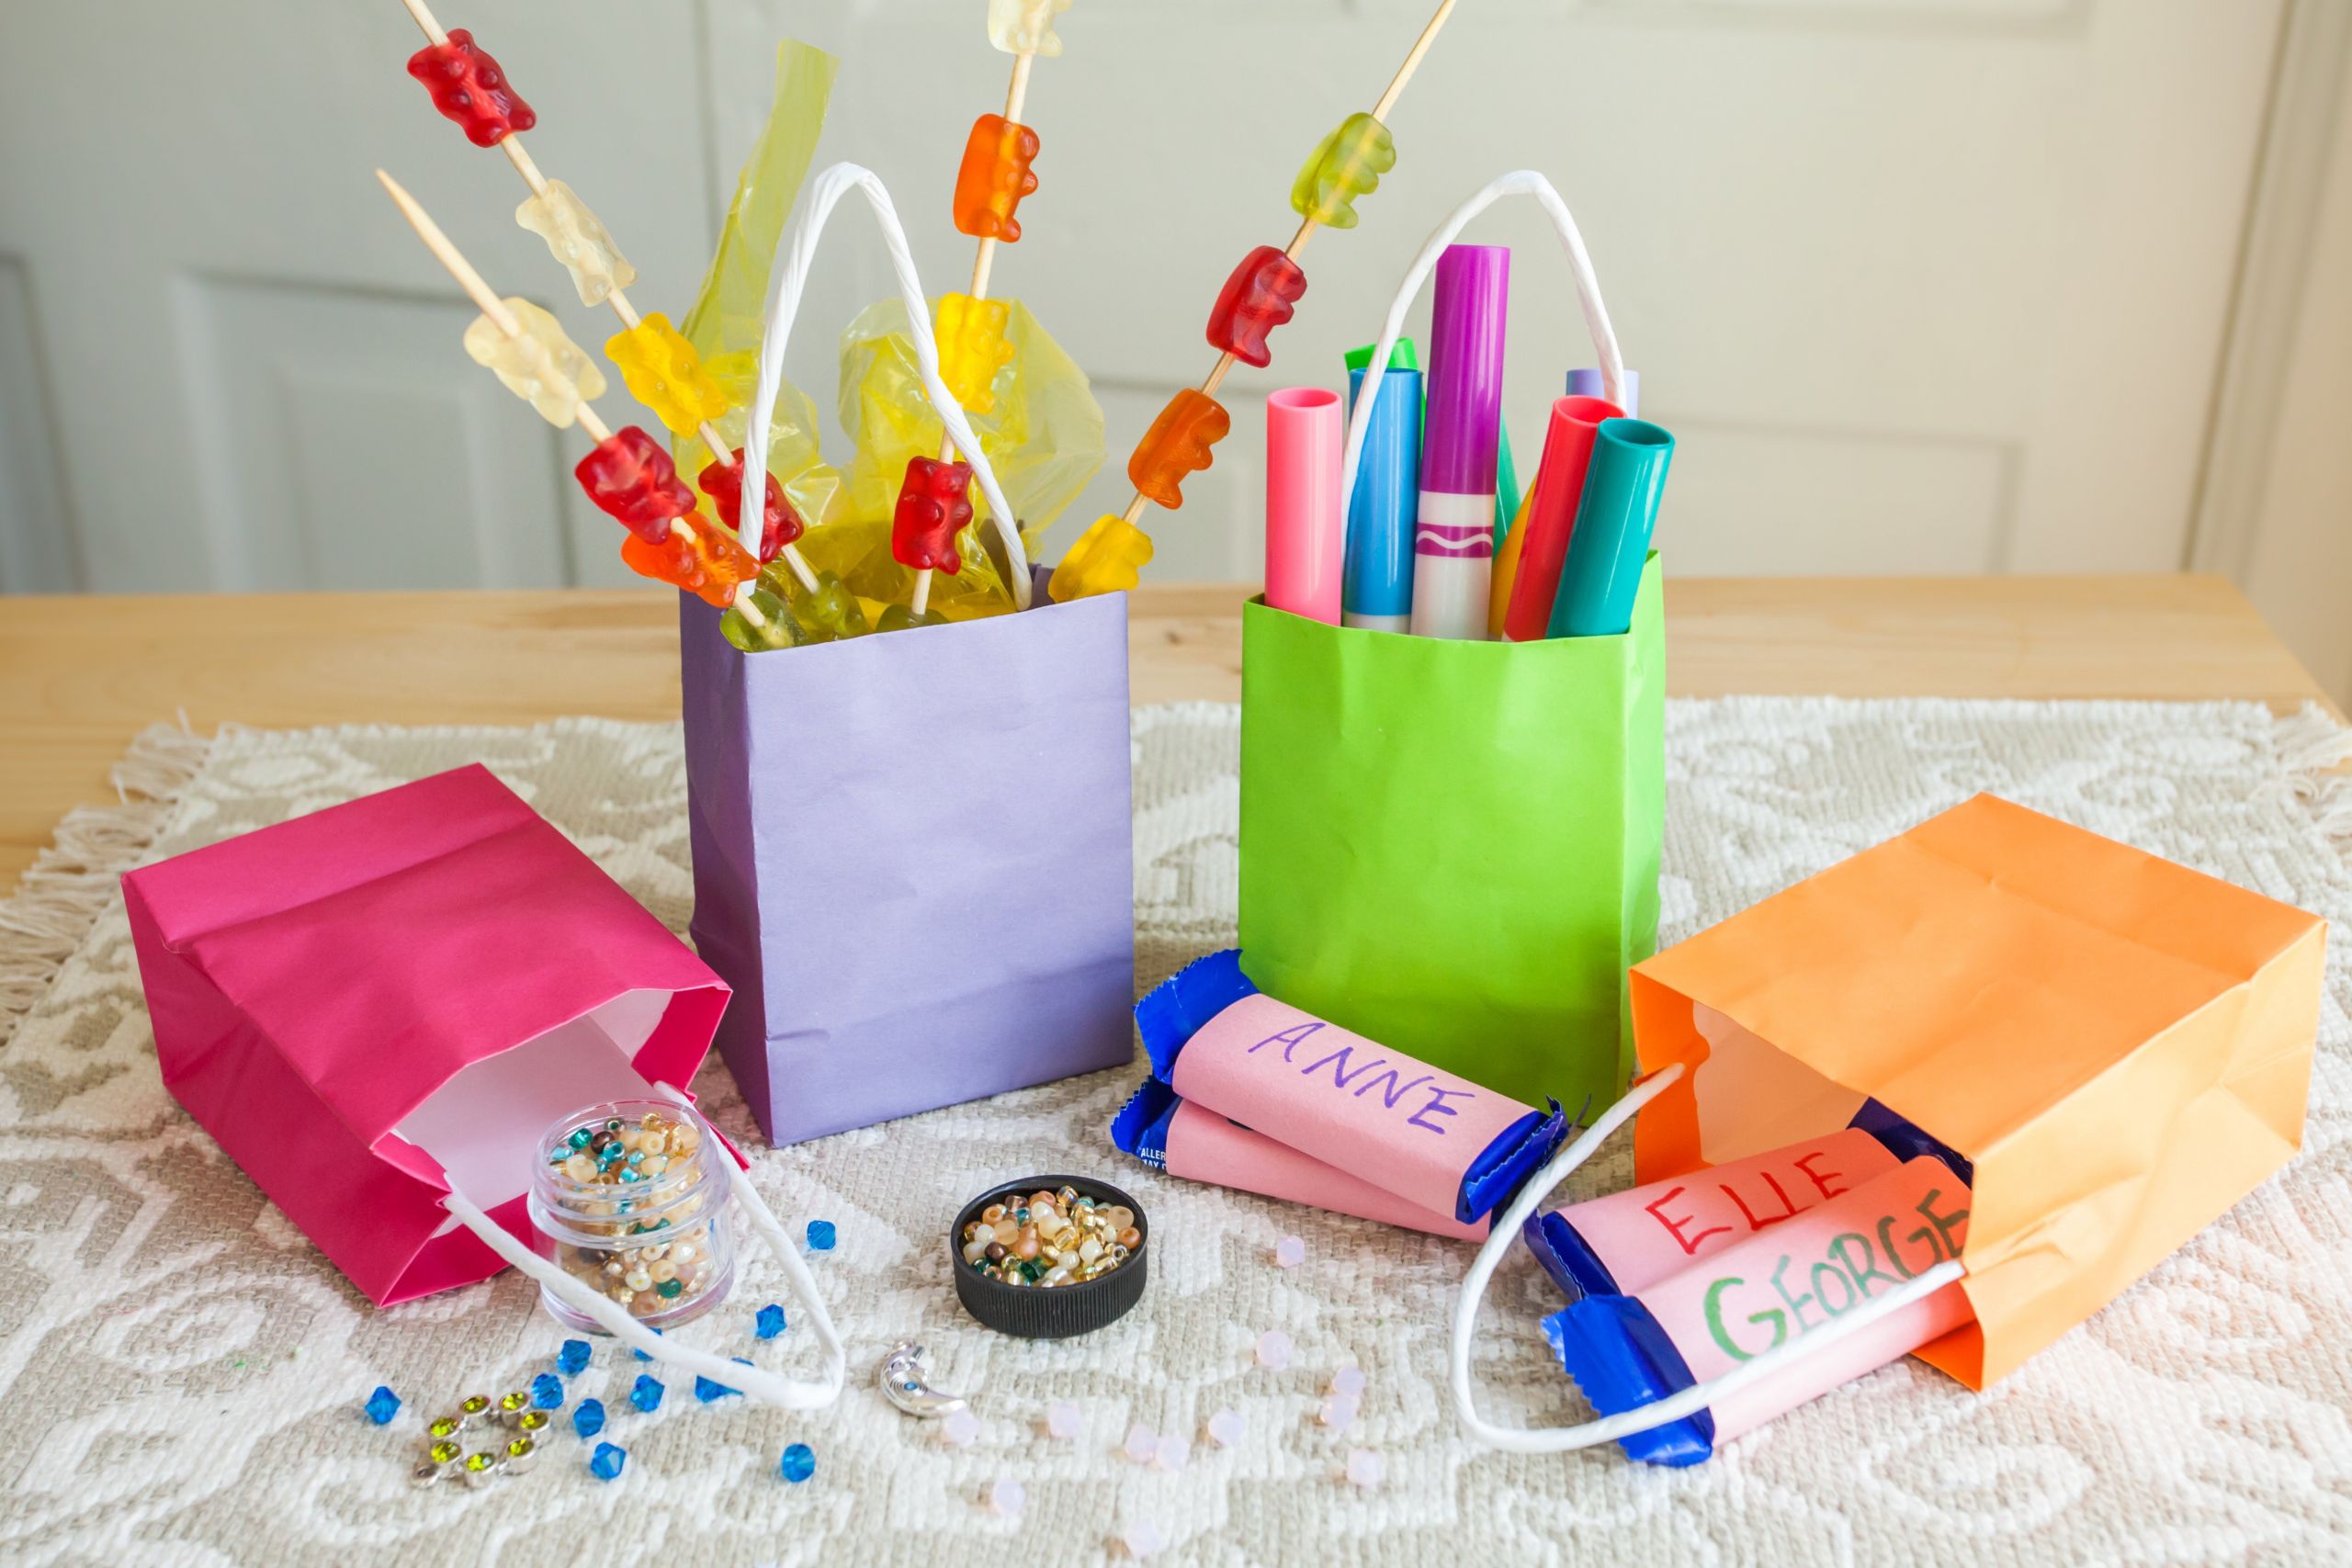 Kids Party Gift Bag Ideas
 Ideas for Kids Birthday Party Gift Bags with